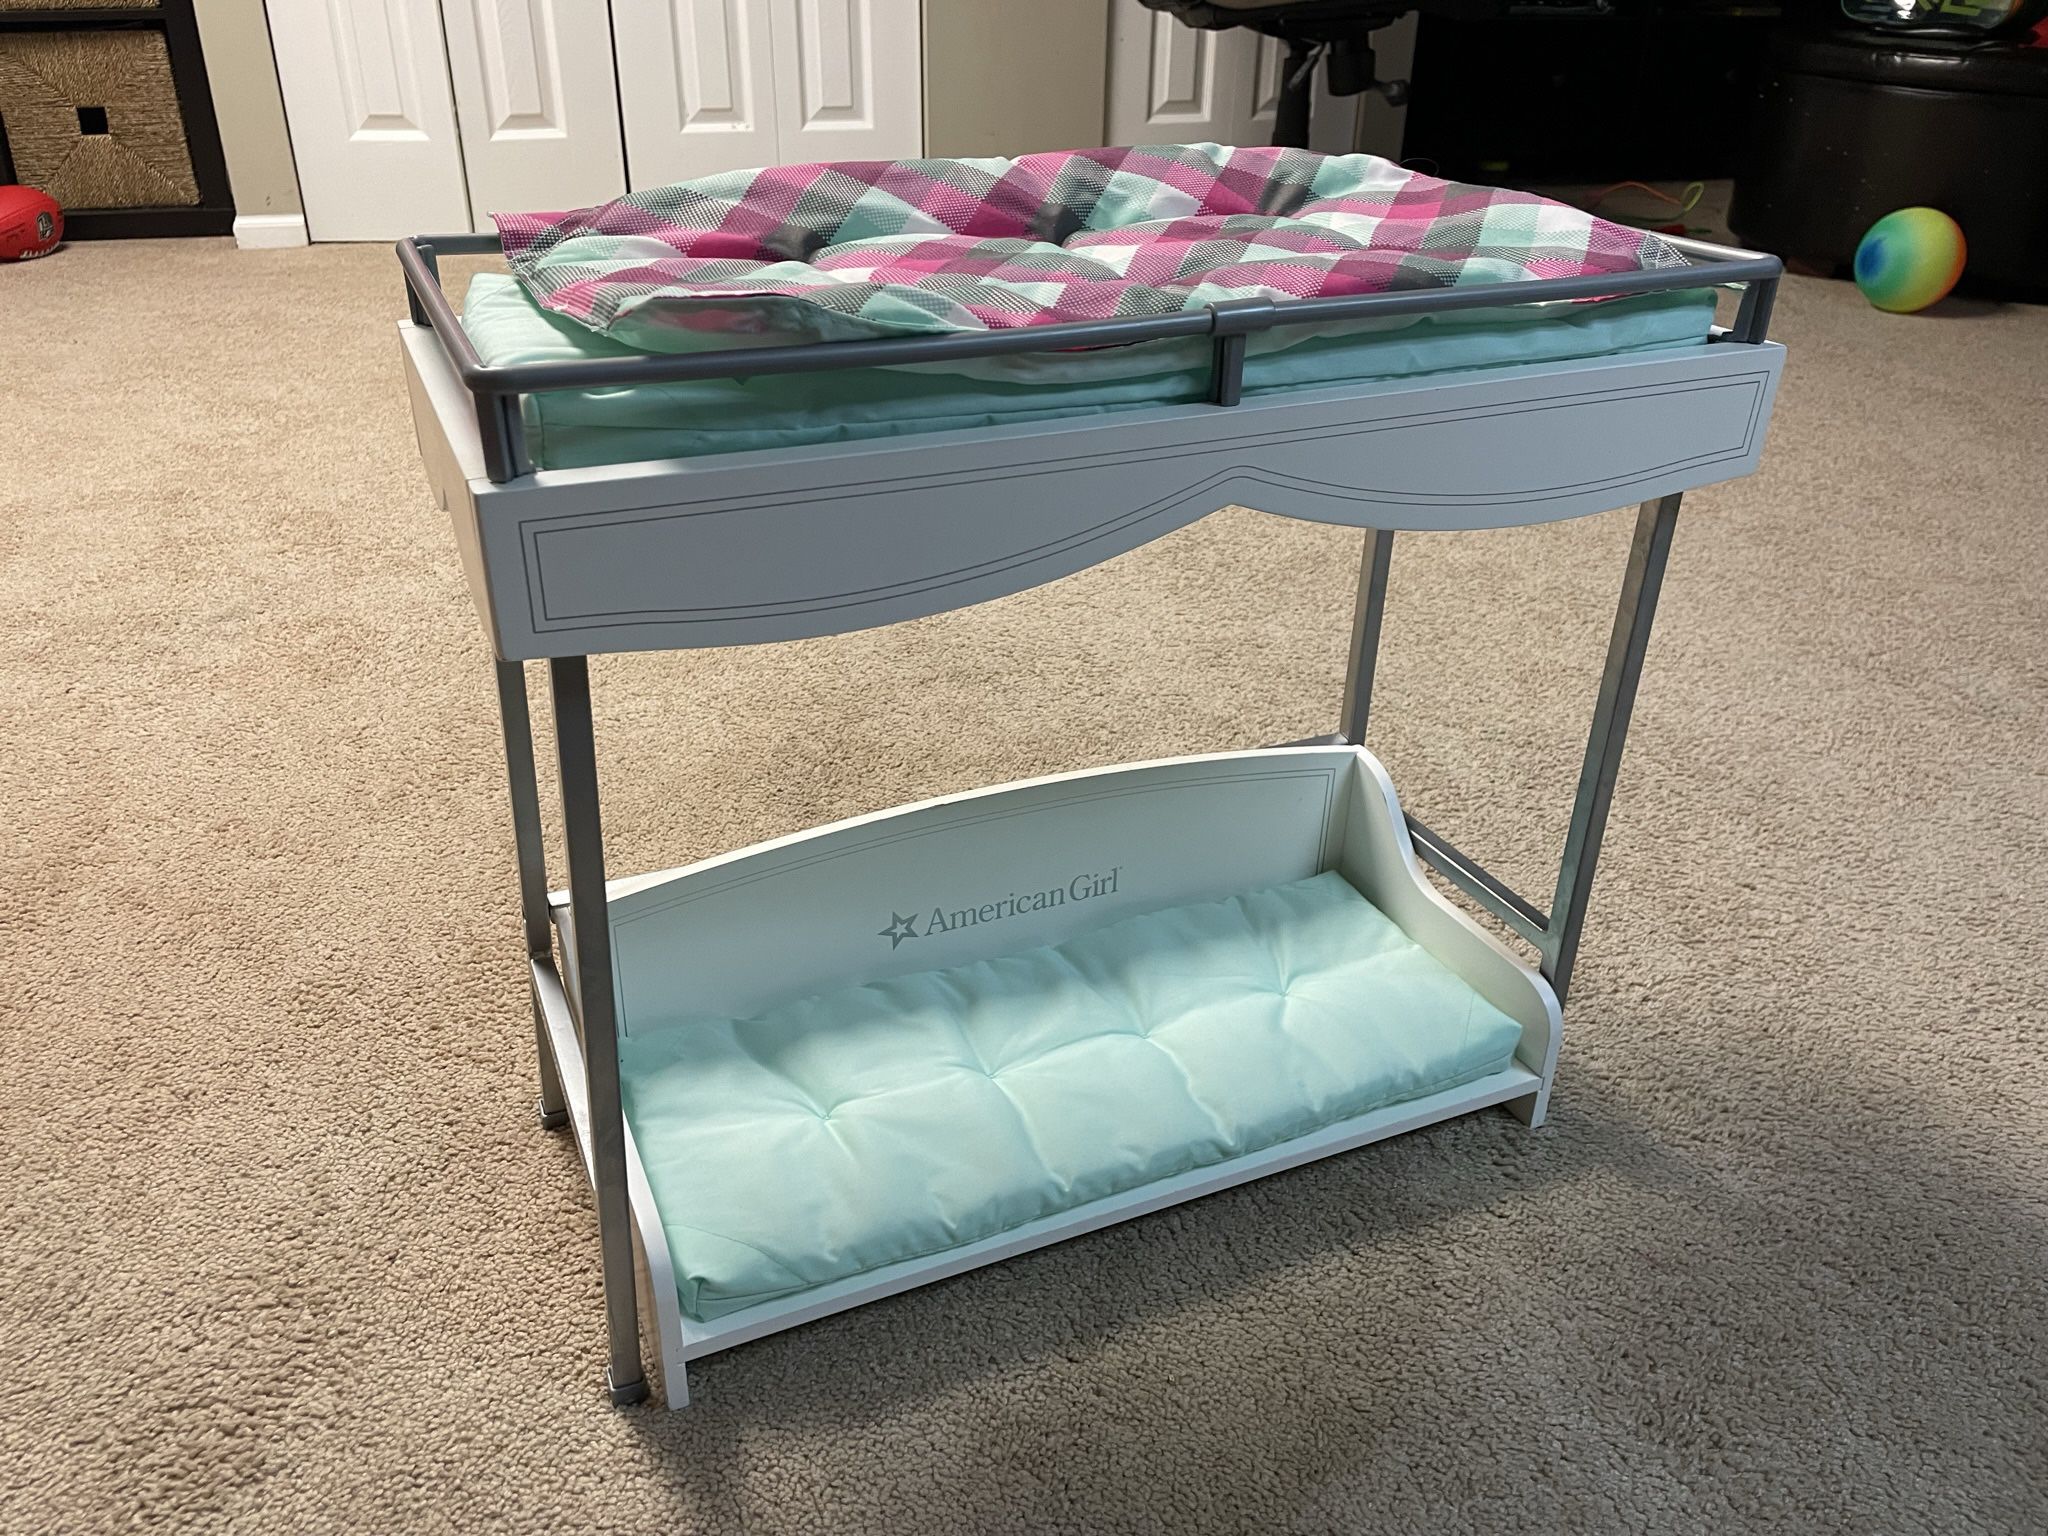 American Girl Doll Bunk Bed